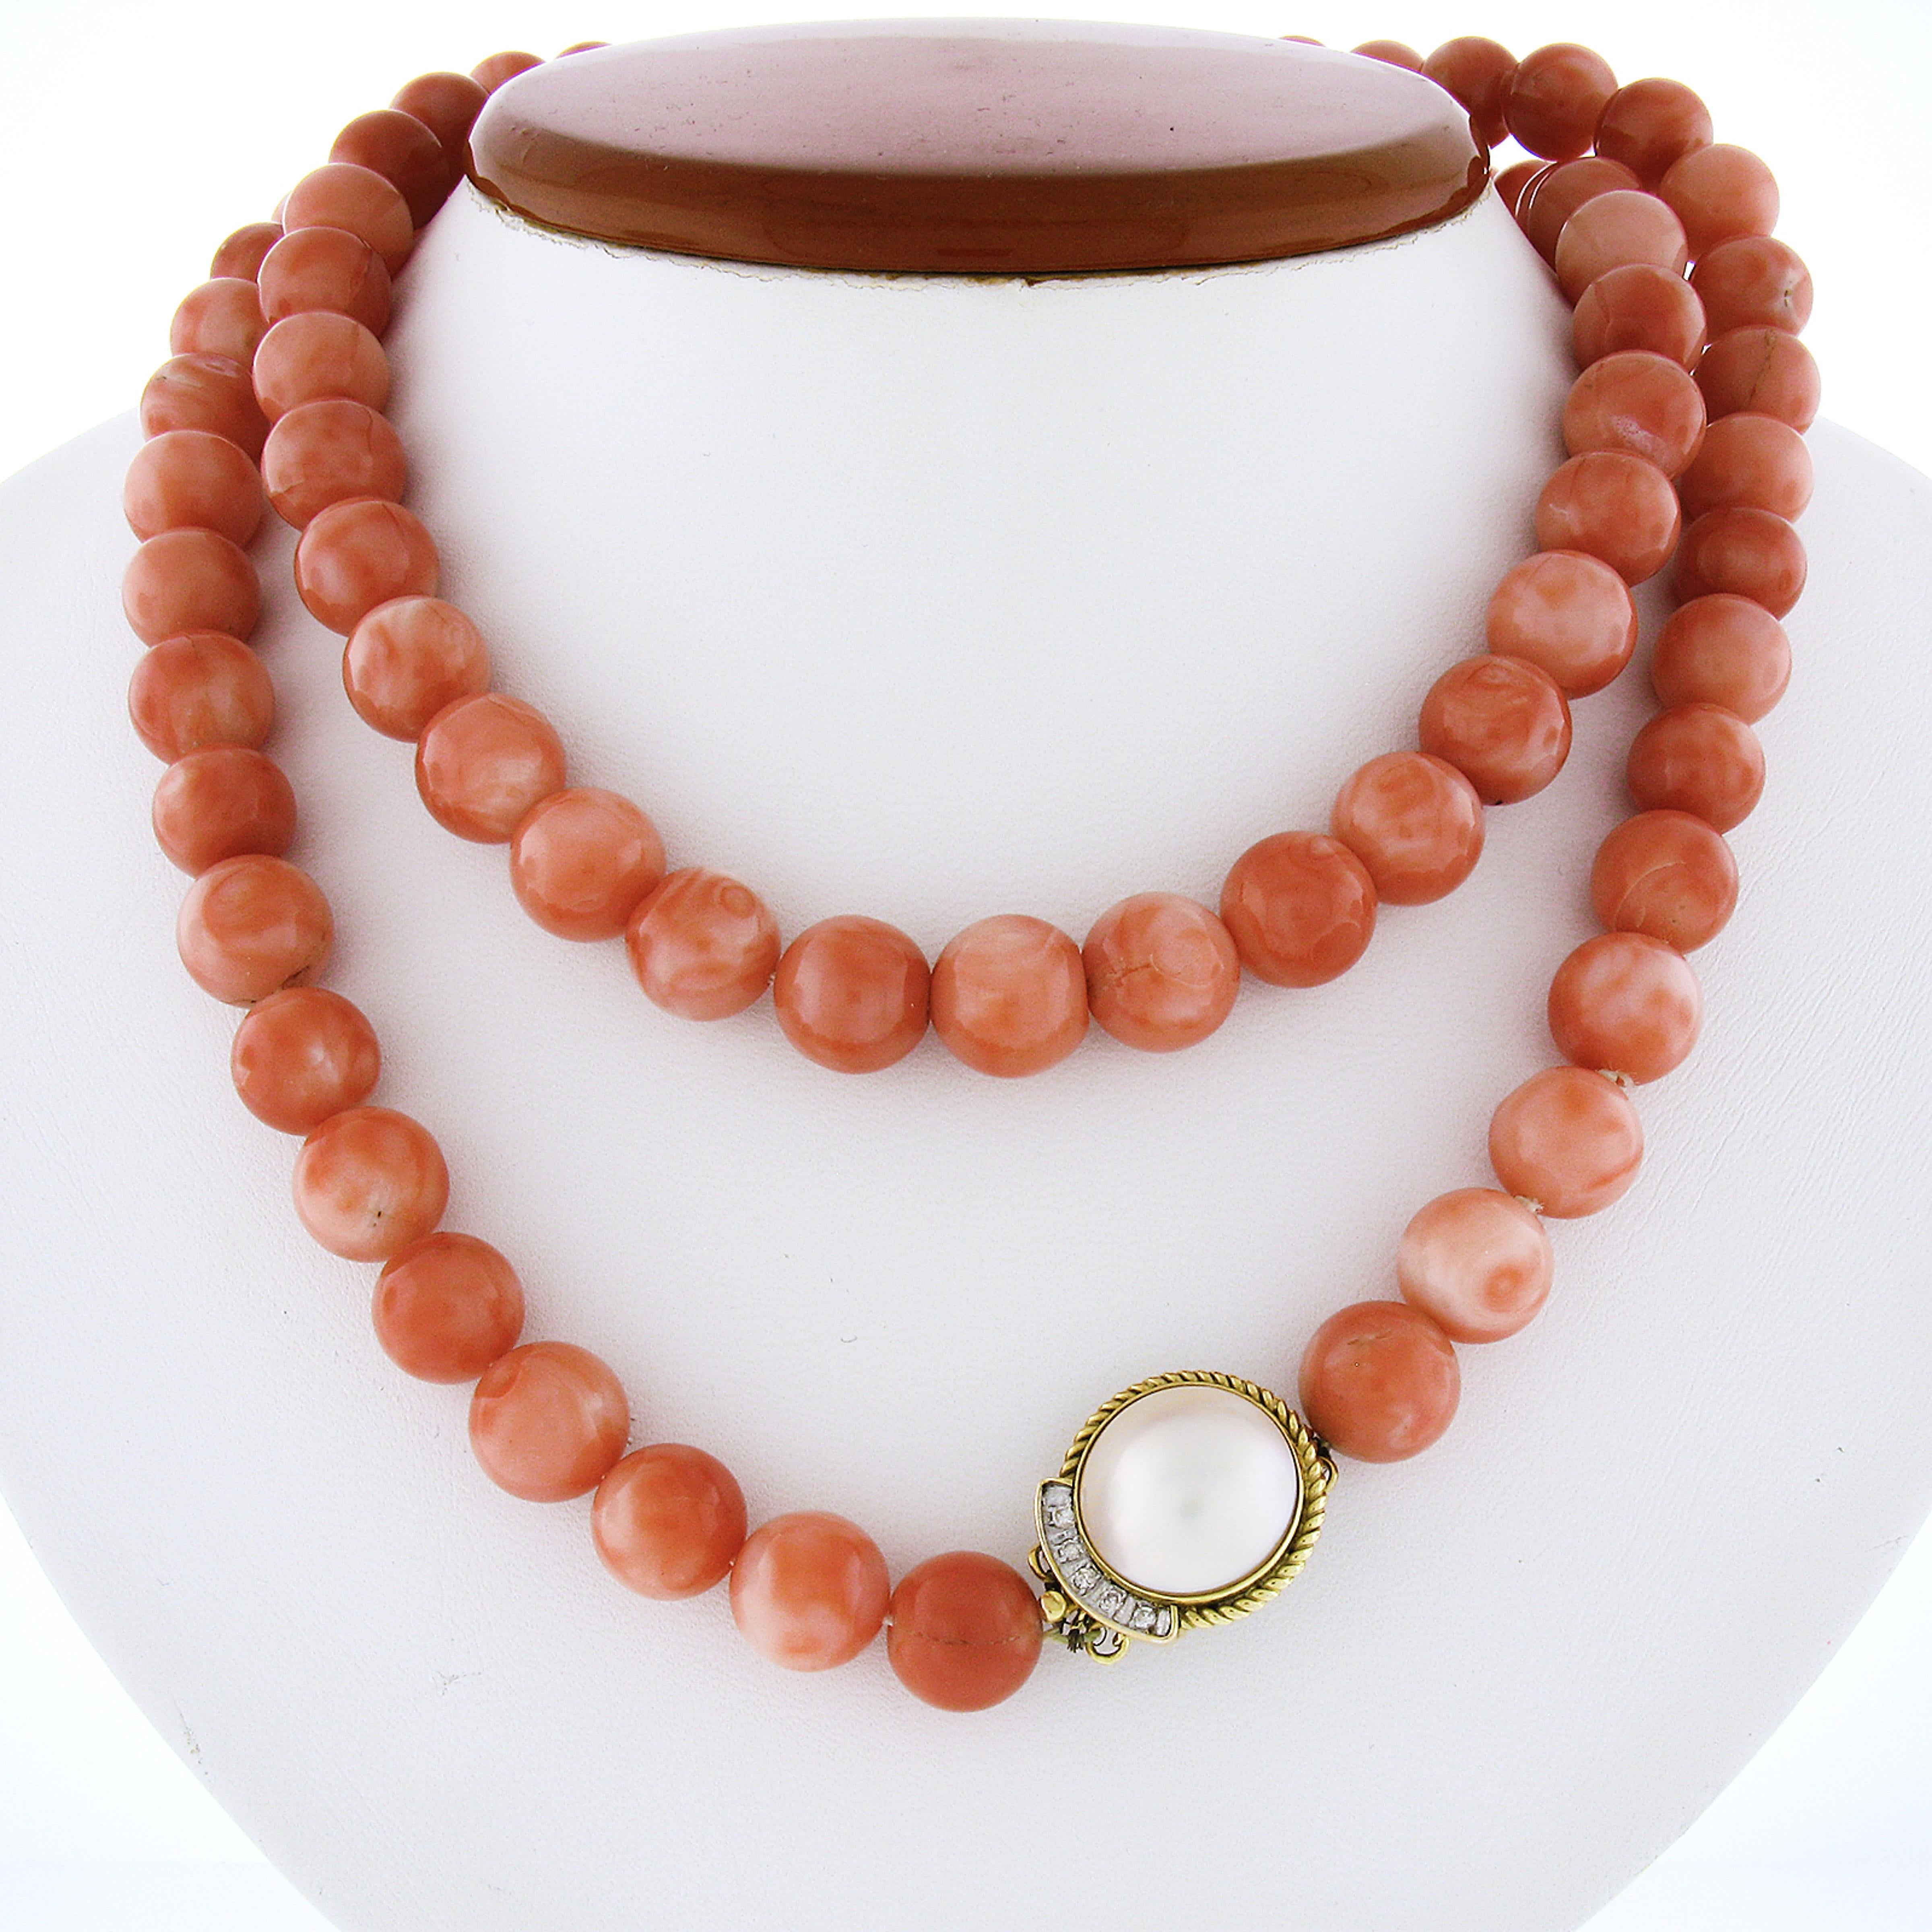 This magnificent vintage strand necklace features gorgeous natural coral beads neatly strung throughout. The lovely coral are GIA certified (2 beads were chosen at random for testing) as being 100% natural showing a beautiful red-orange color with